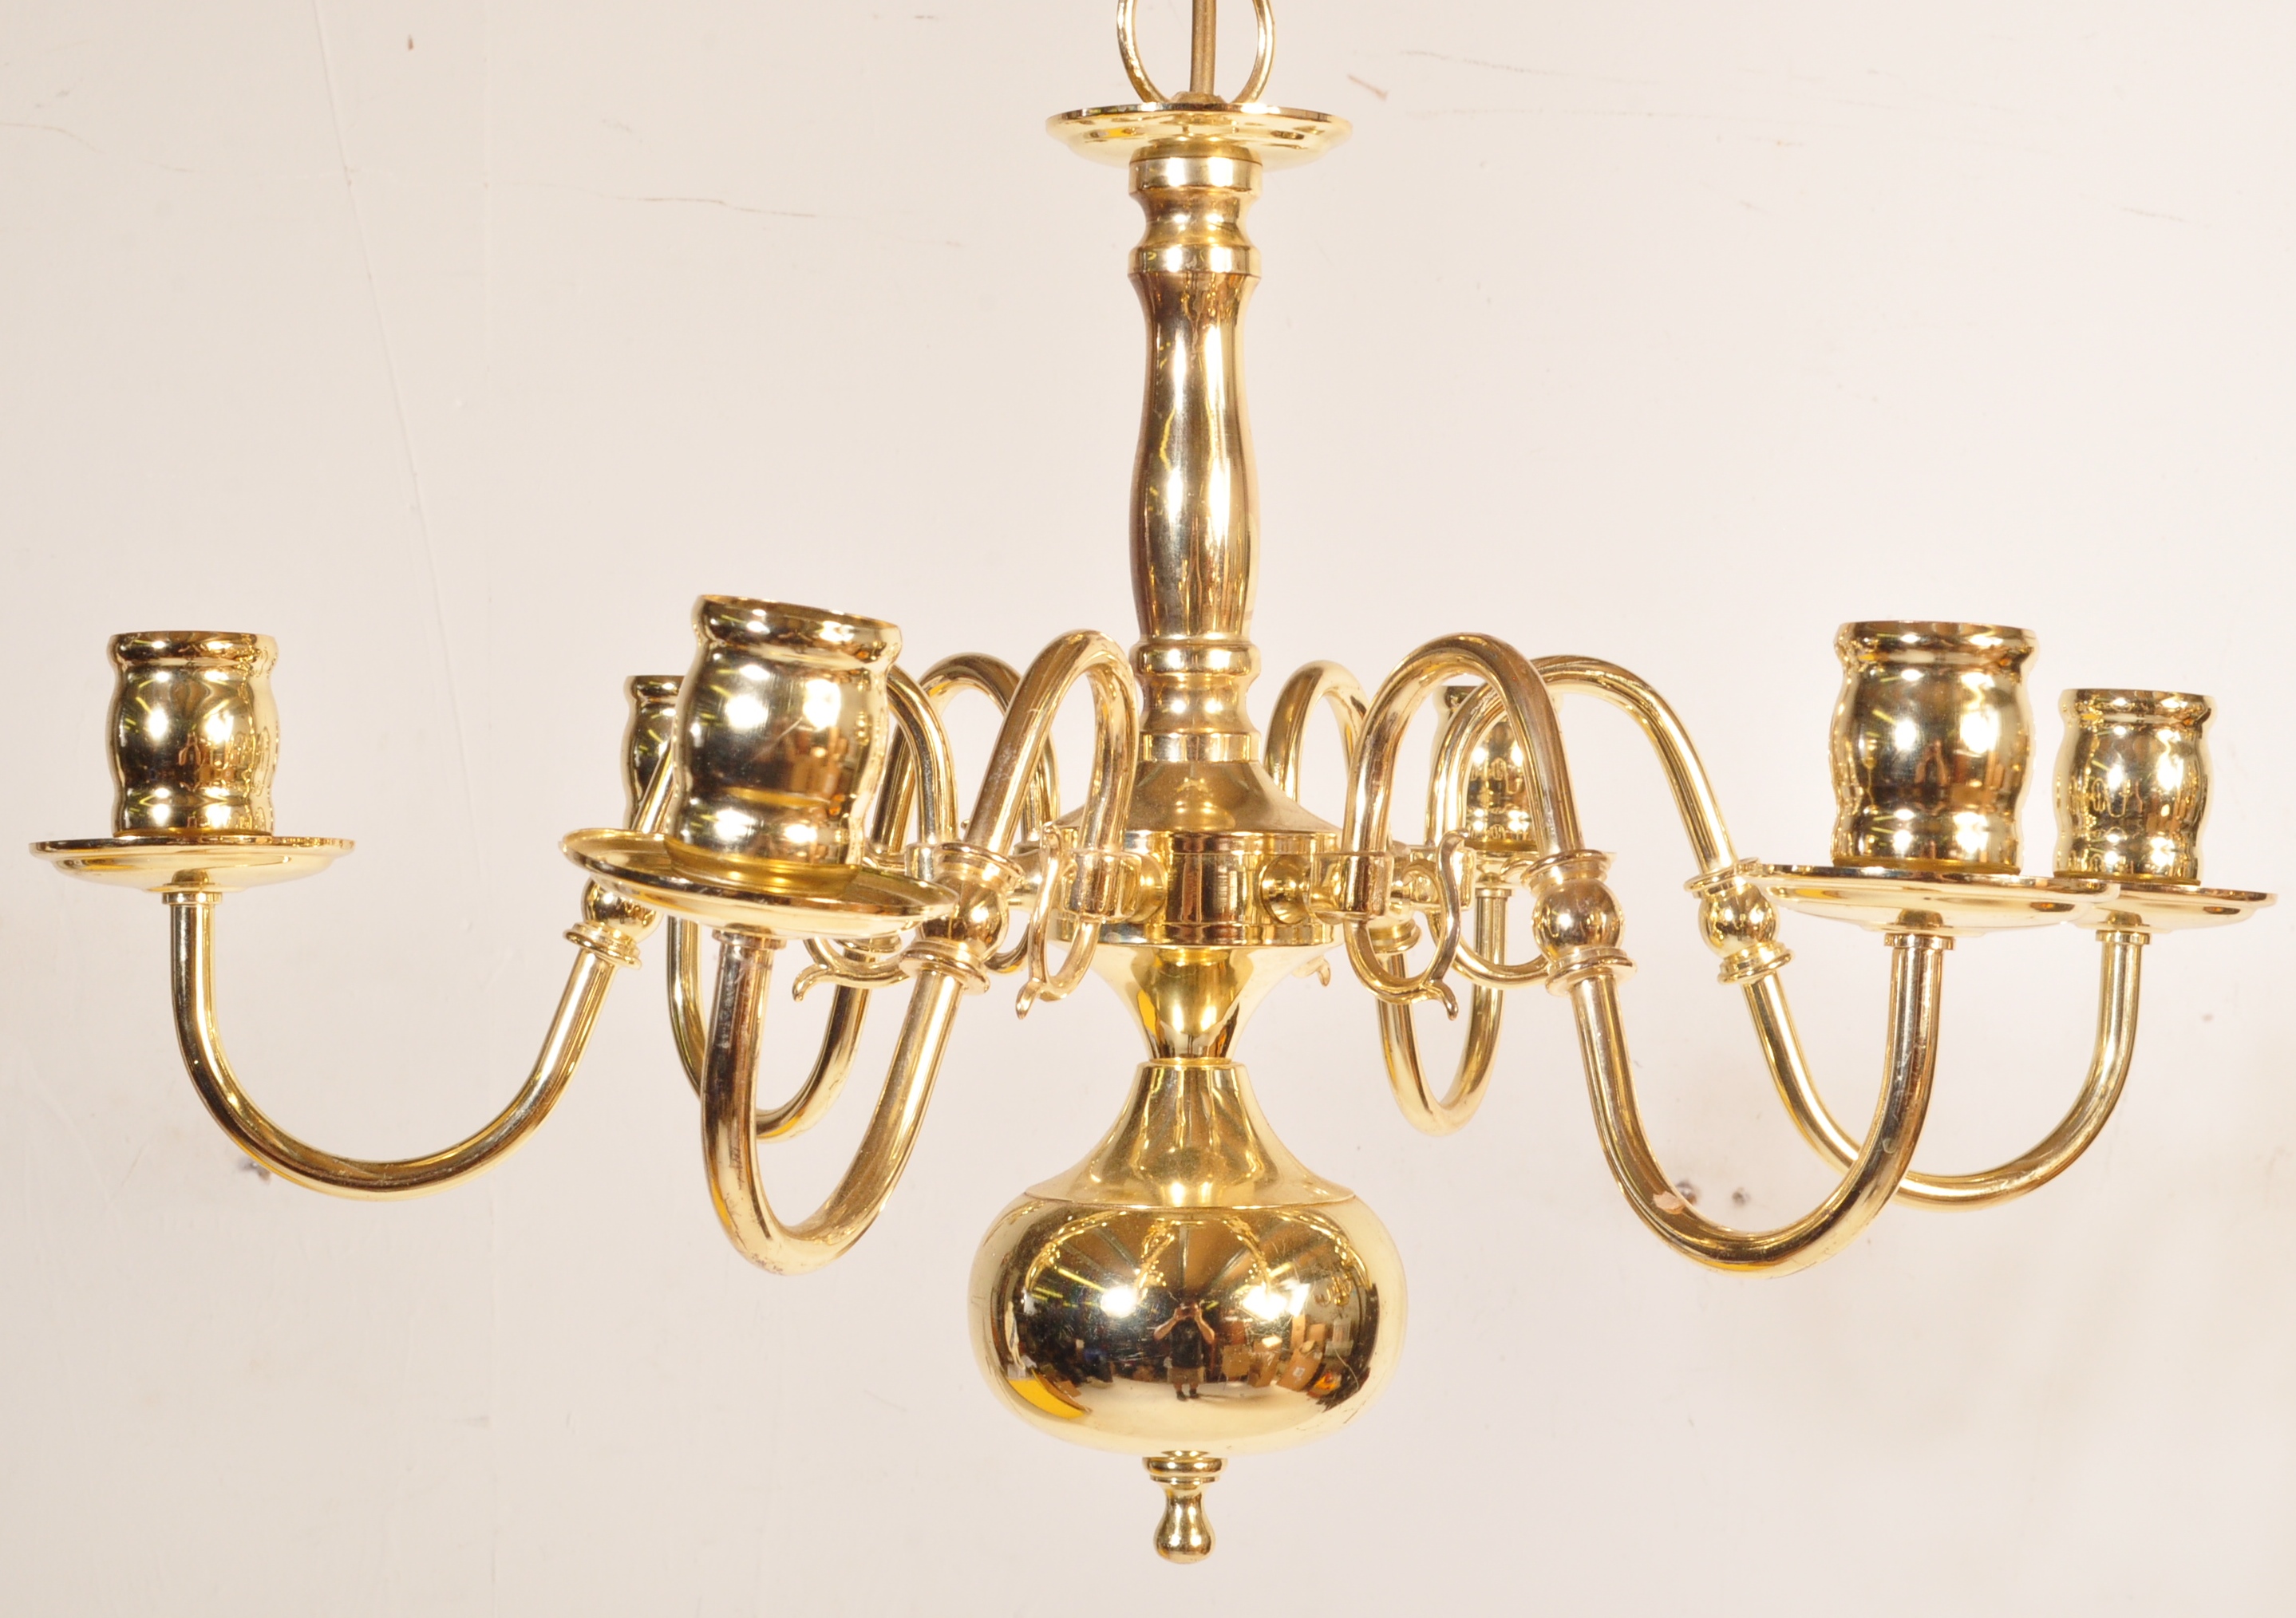 PAIR OF DUTCH BRASS BRANCH HANGING CEILING LIGHTS - Image 3 of 5